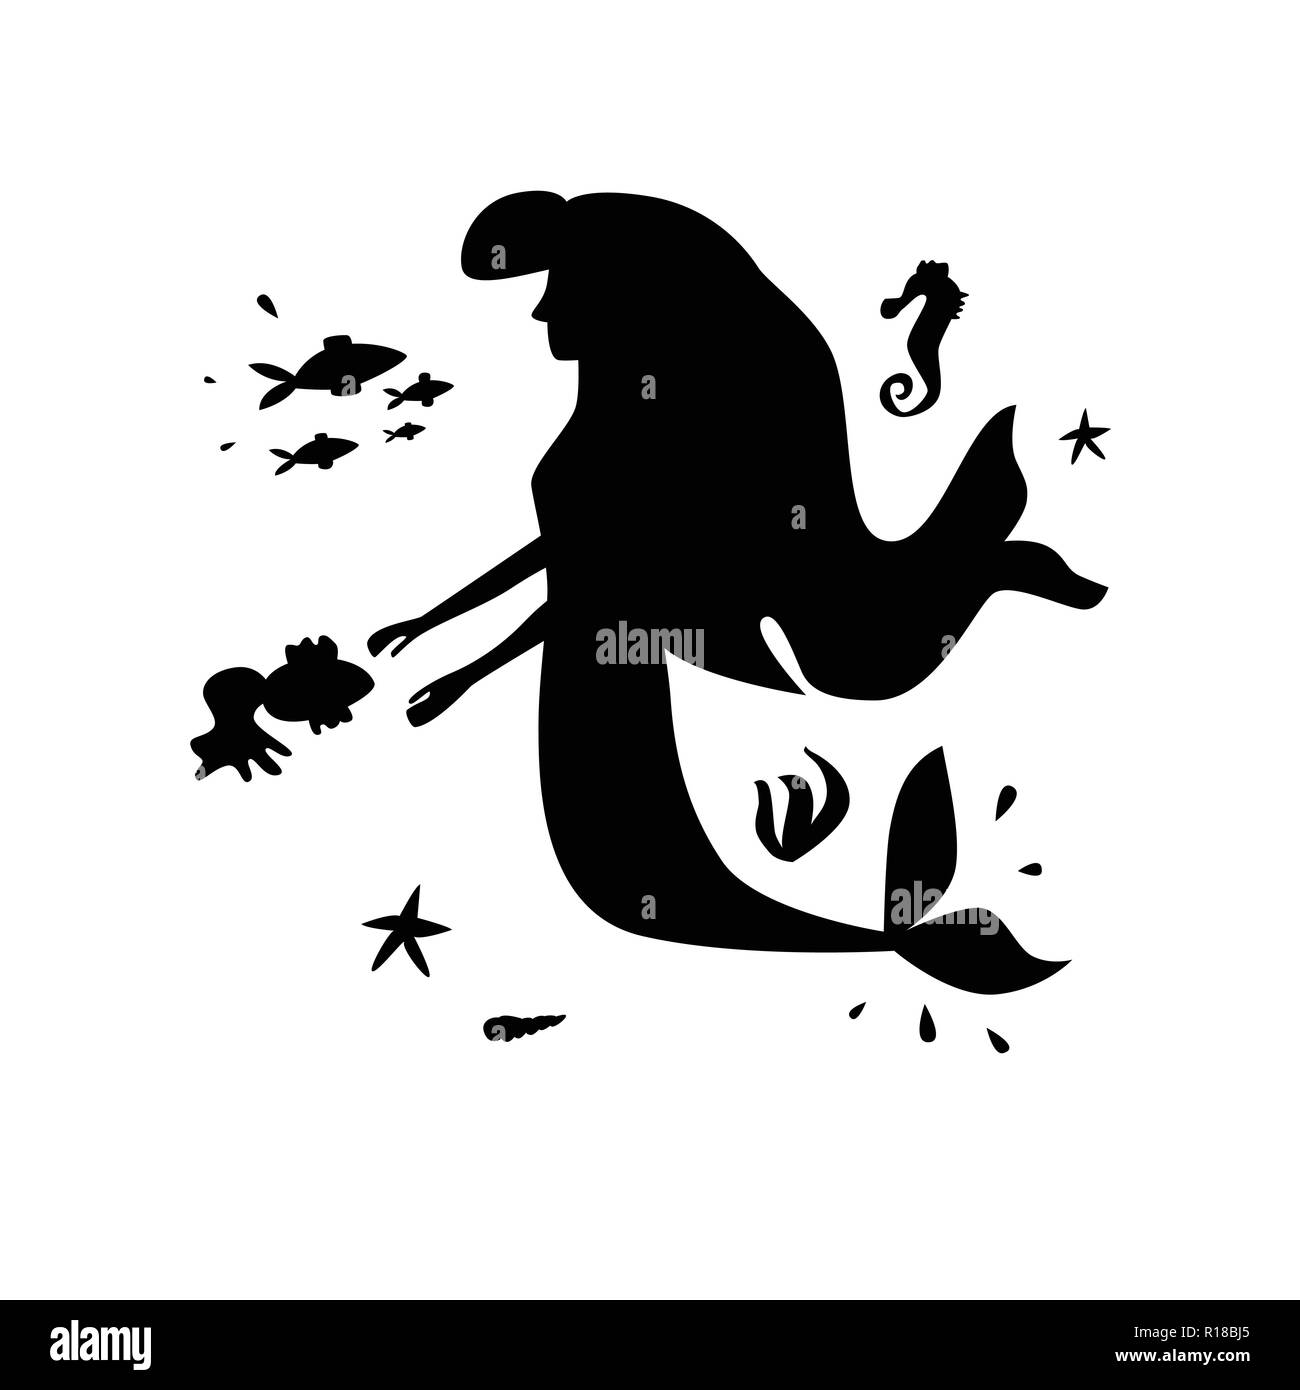 Sea silhouette composition. Mermaid and other underwater shadow-figure. Vector illustration. Stock Vector